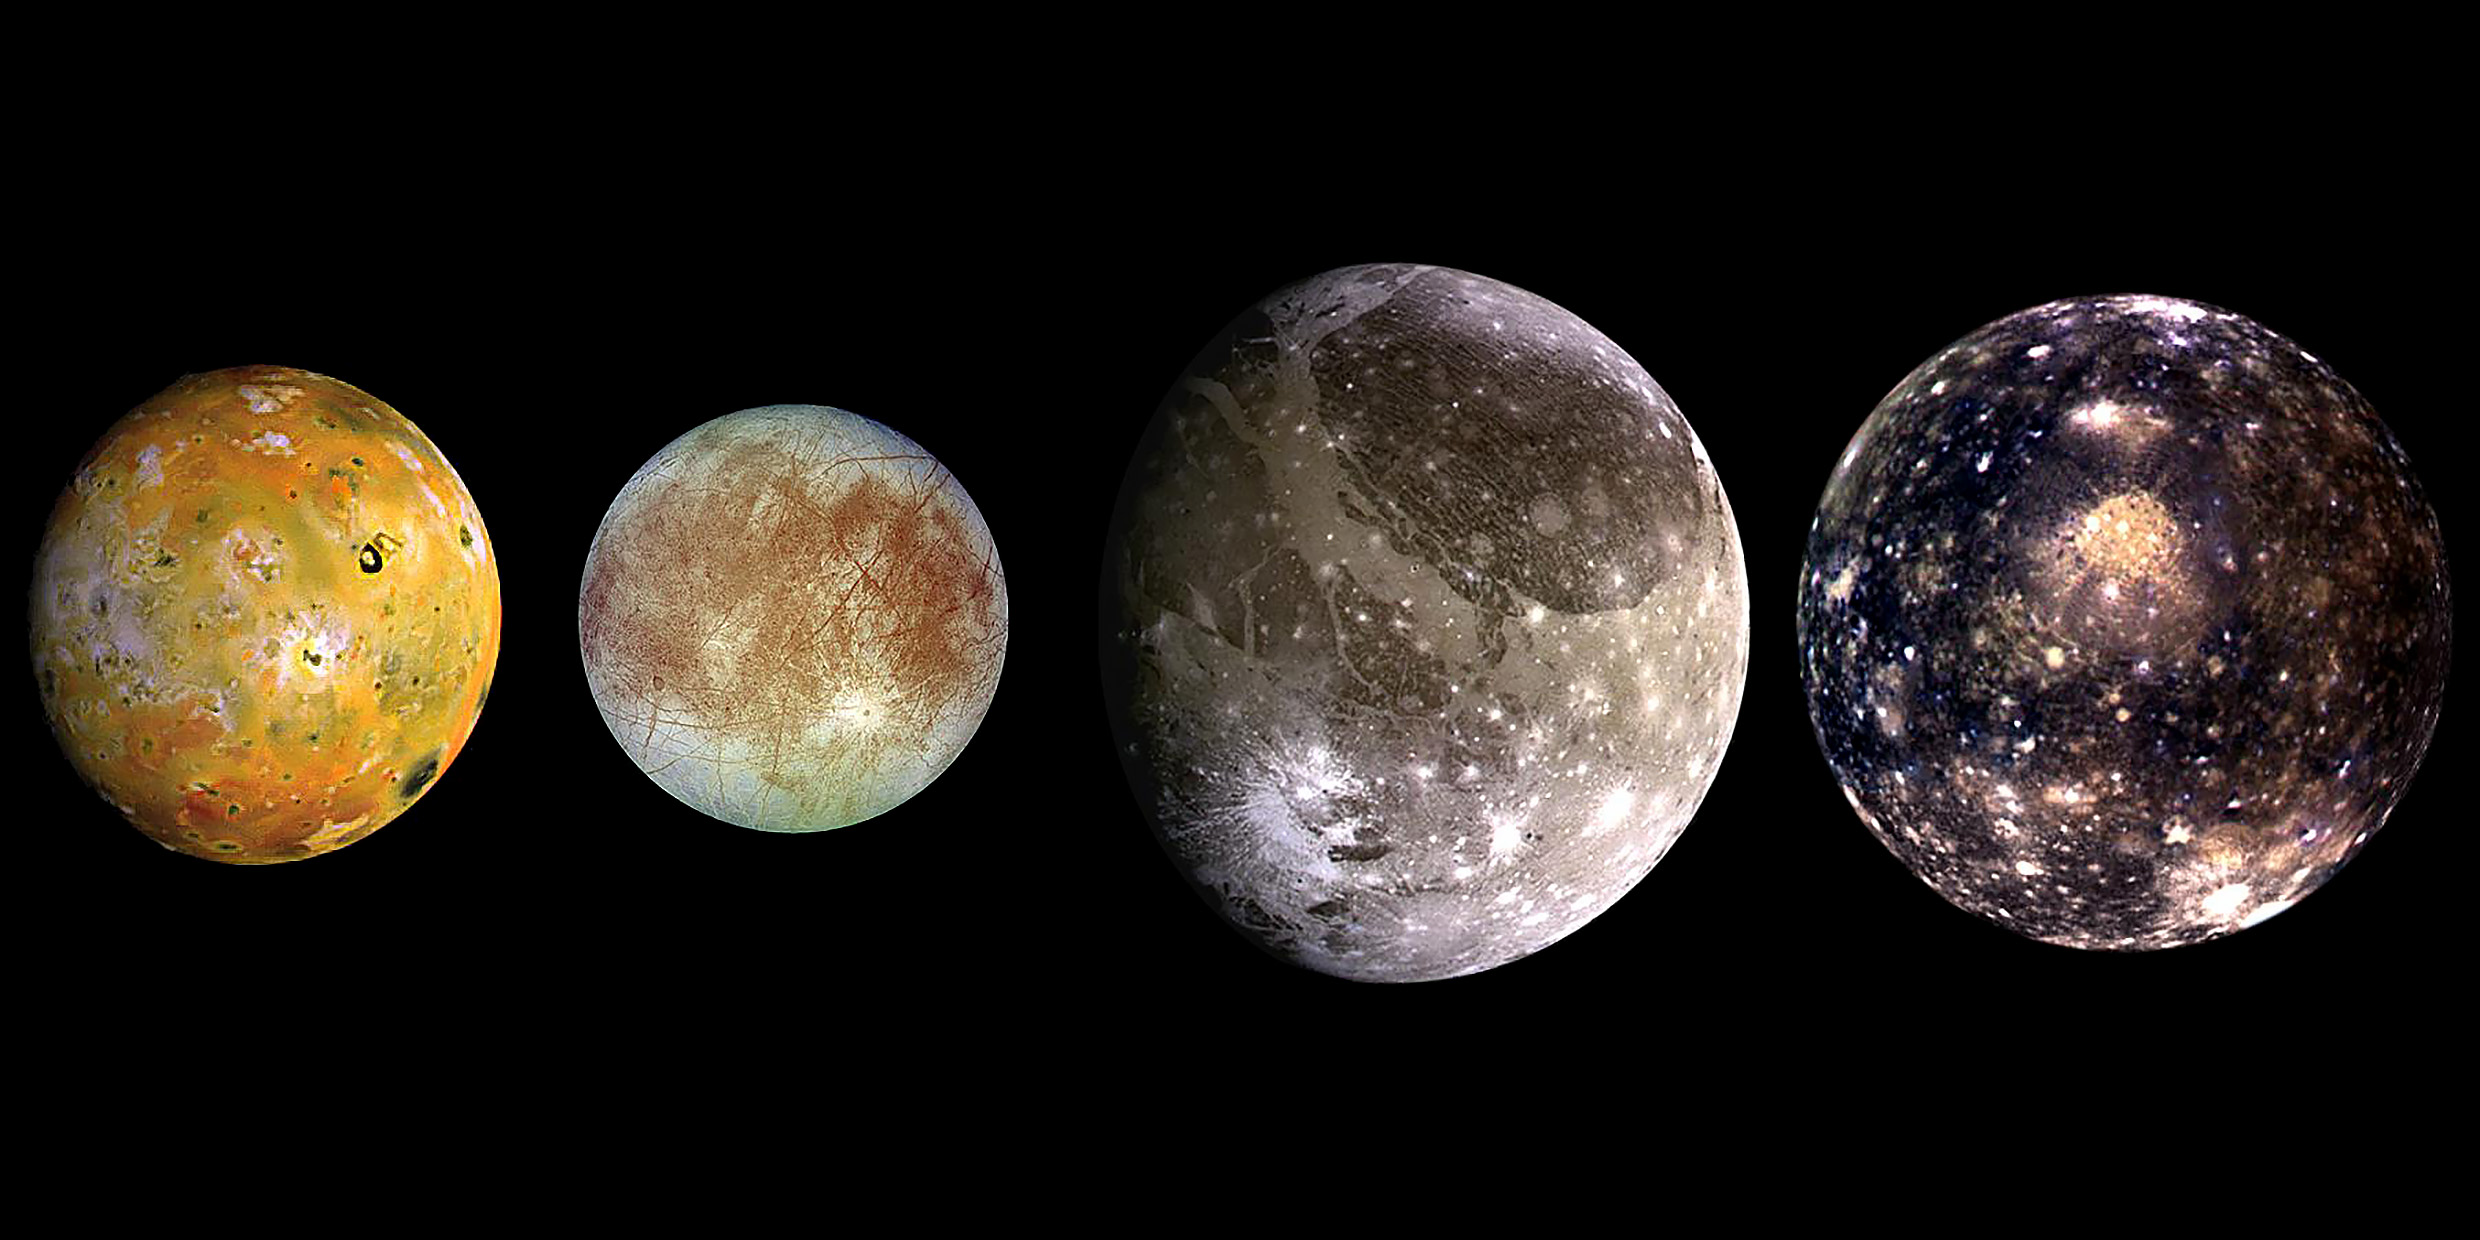 Astronomical image of the four major moons of Jupiter